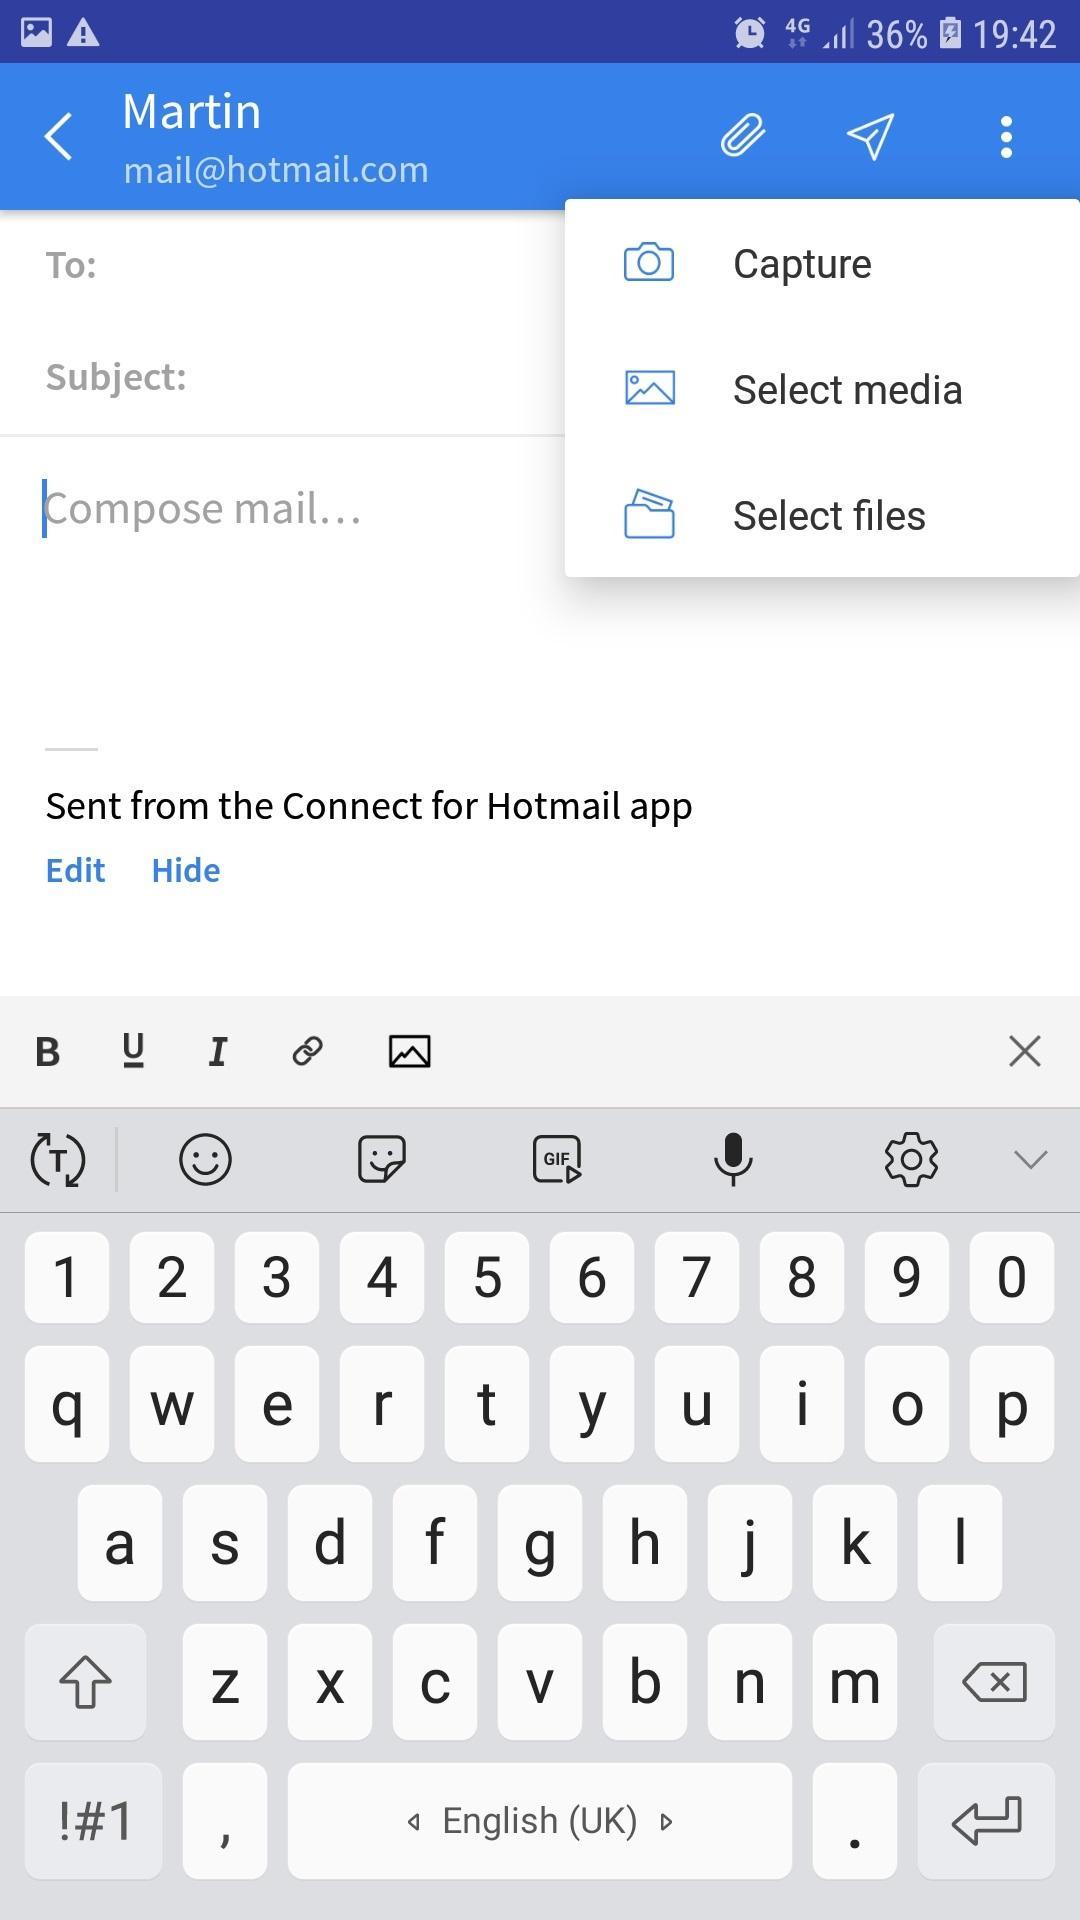 Connect for Hotmail amp; Outlook: Mail and Calendar 5.3.63 Screenshot 2